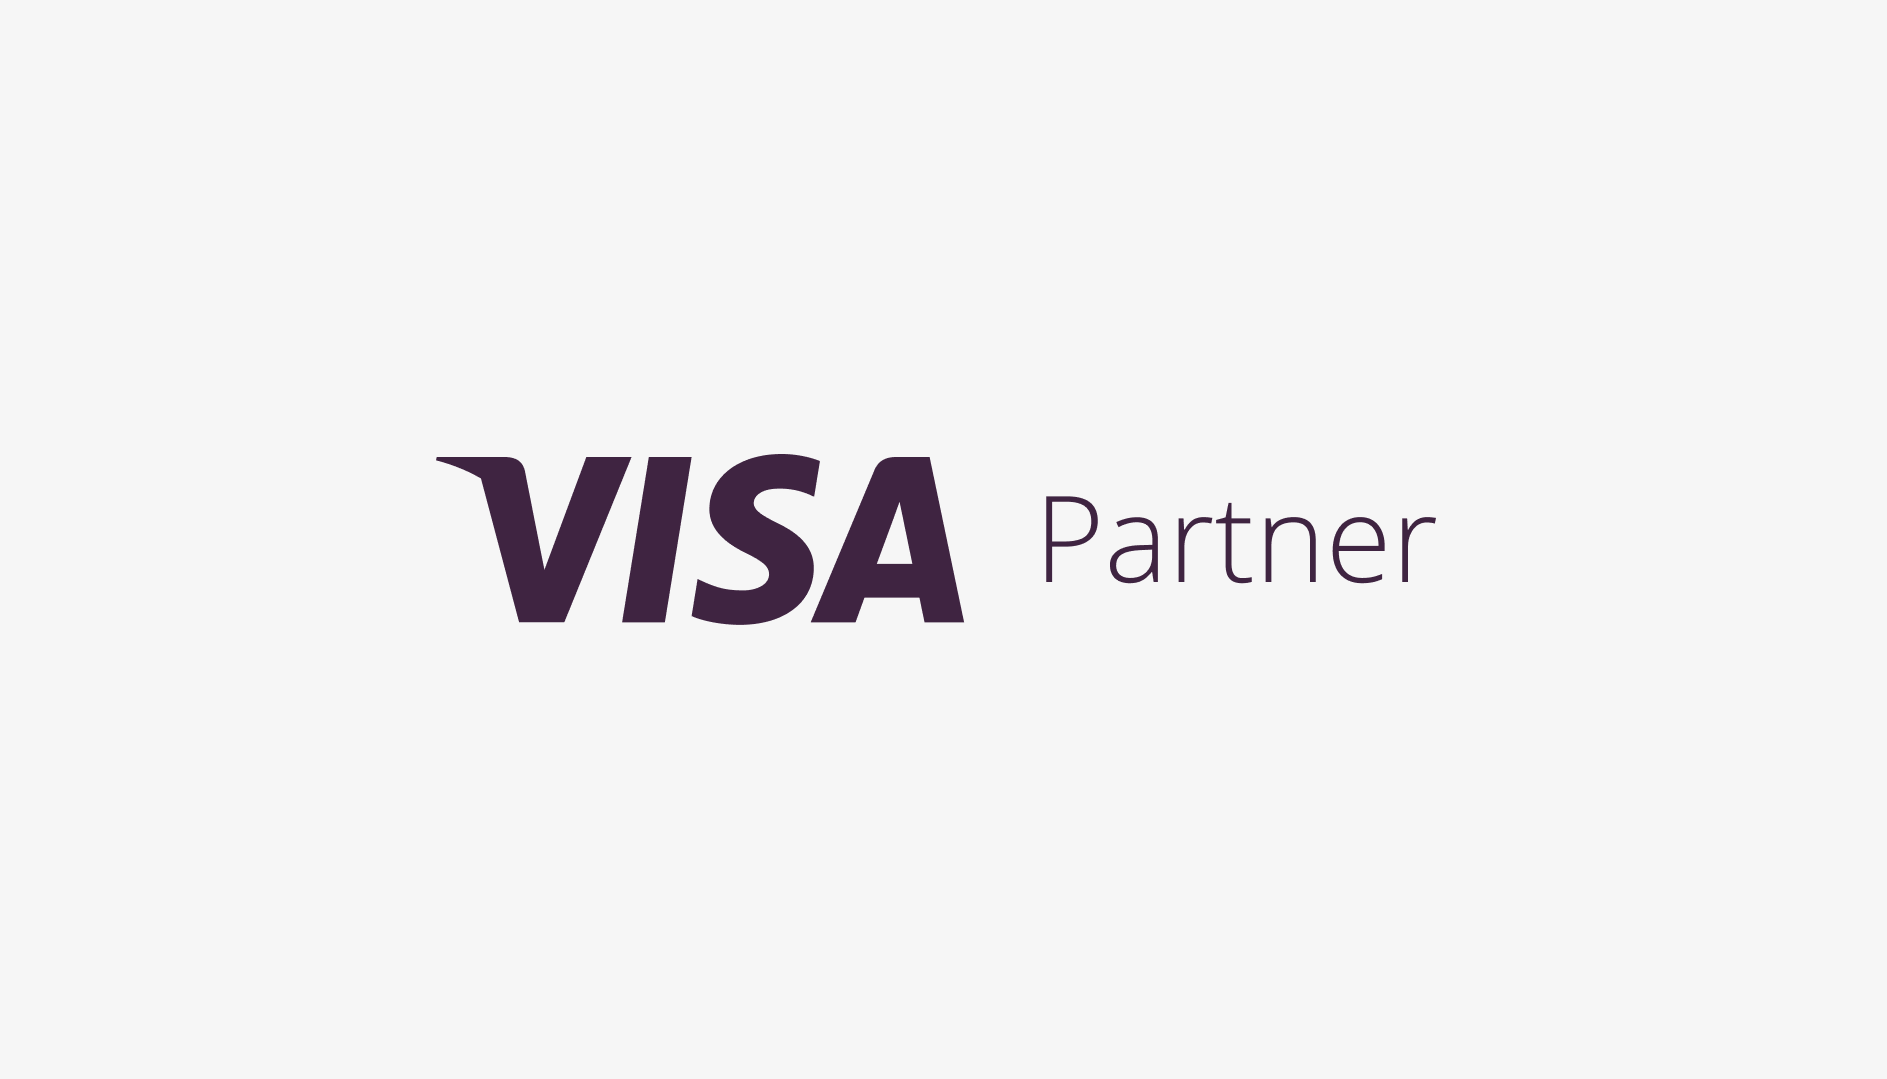 BankiFi joins Visa Fintech Partner Connect to bring SME business banking solution to Visa’s clients and partners